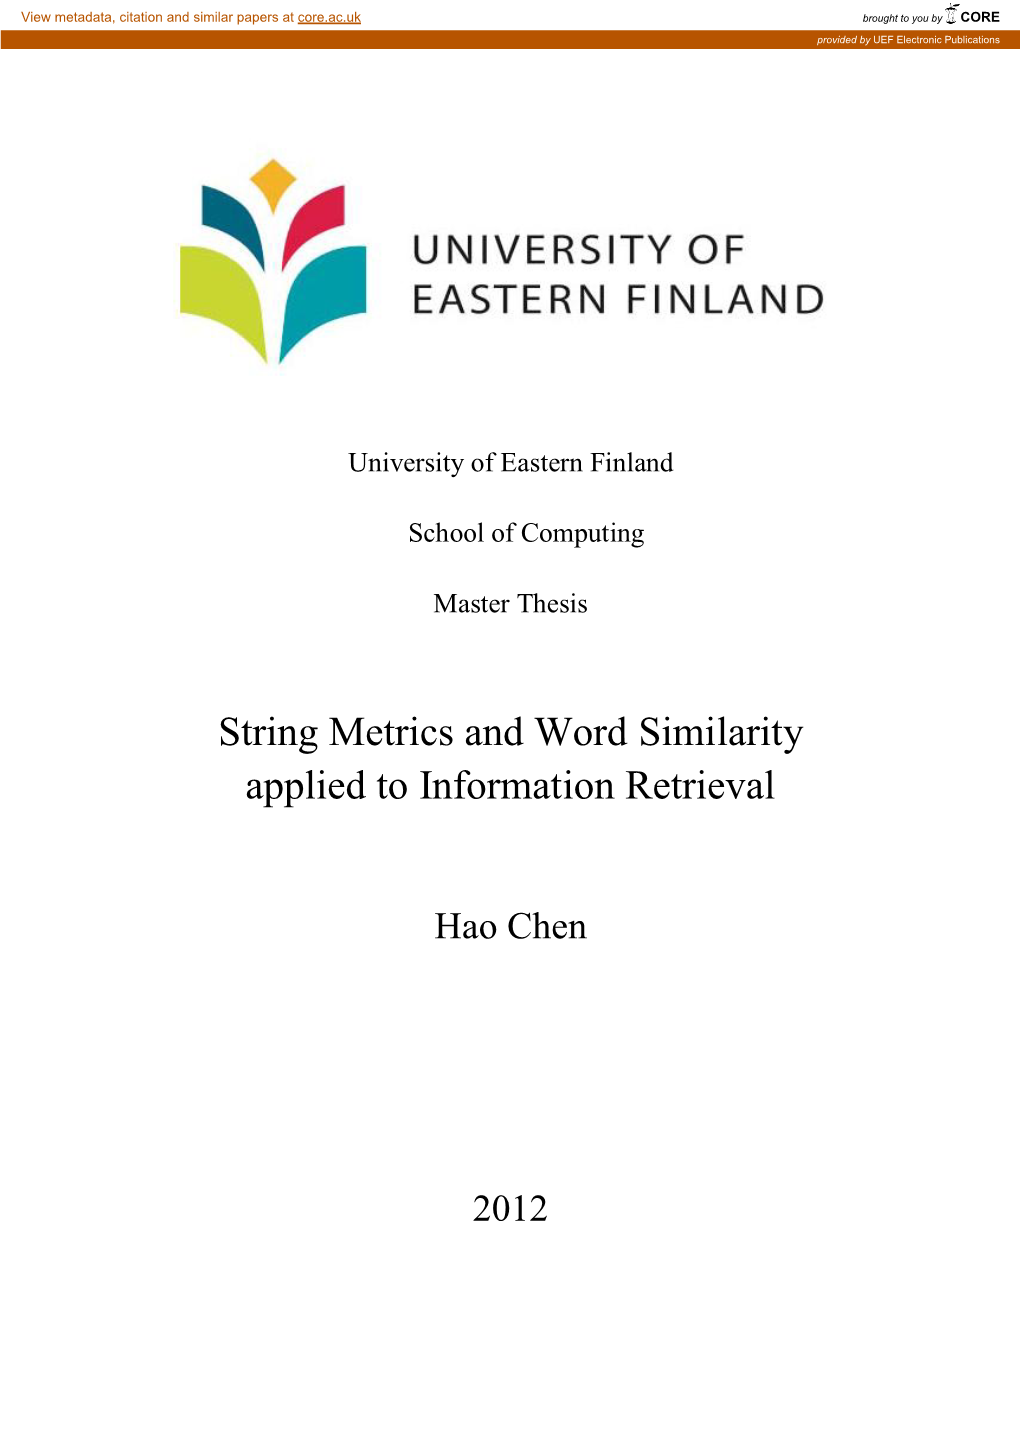 String Metrics and Word Similarity Applied to Information Retrieval